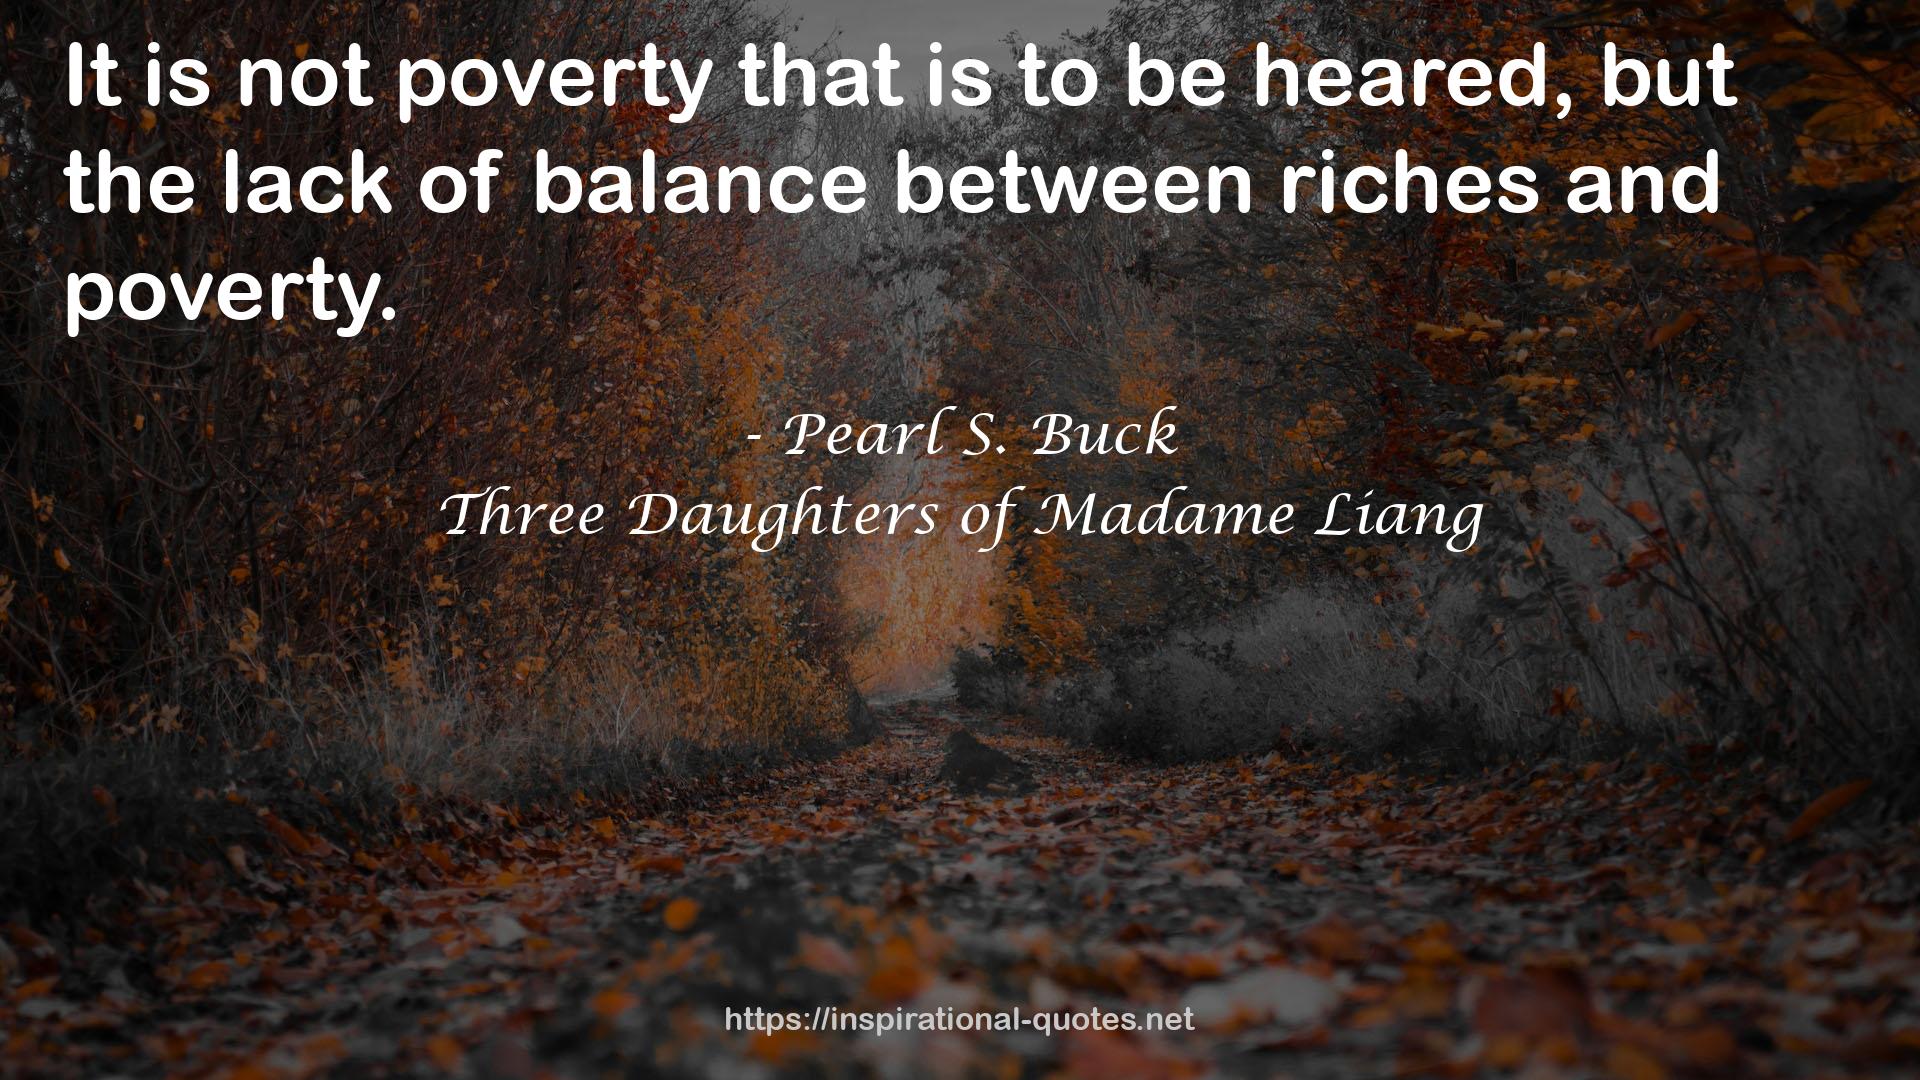 Three Daughters of Madame Liang QUOTES